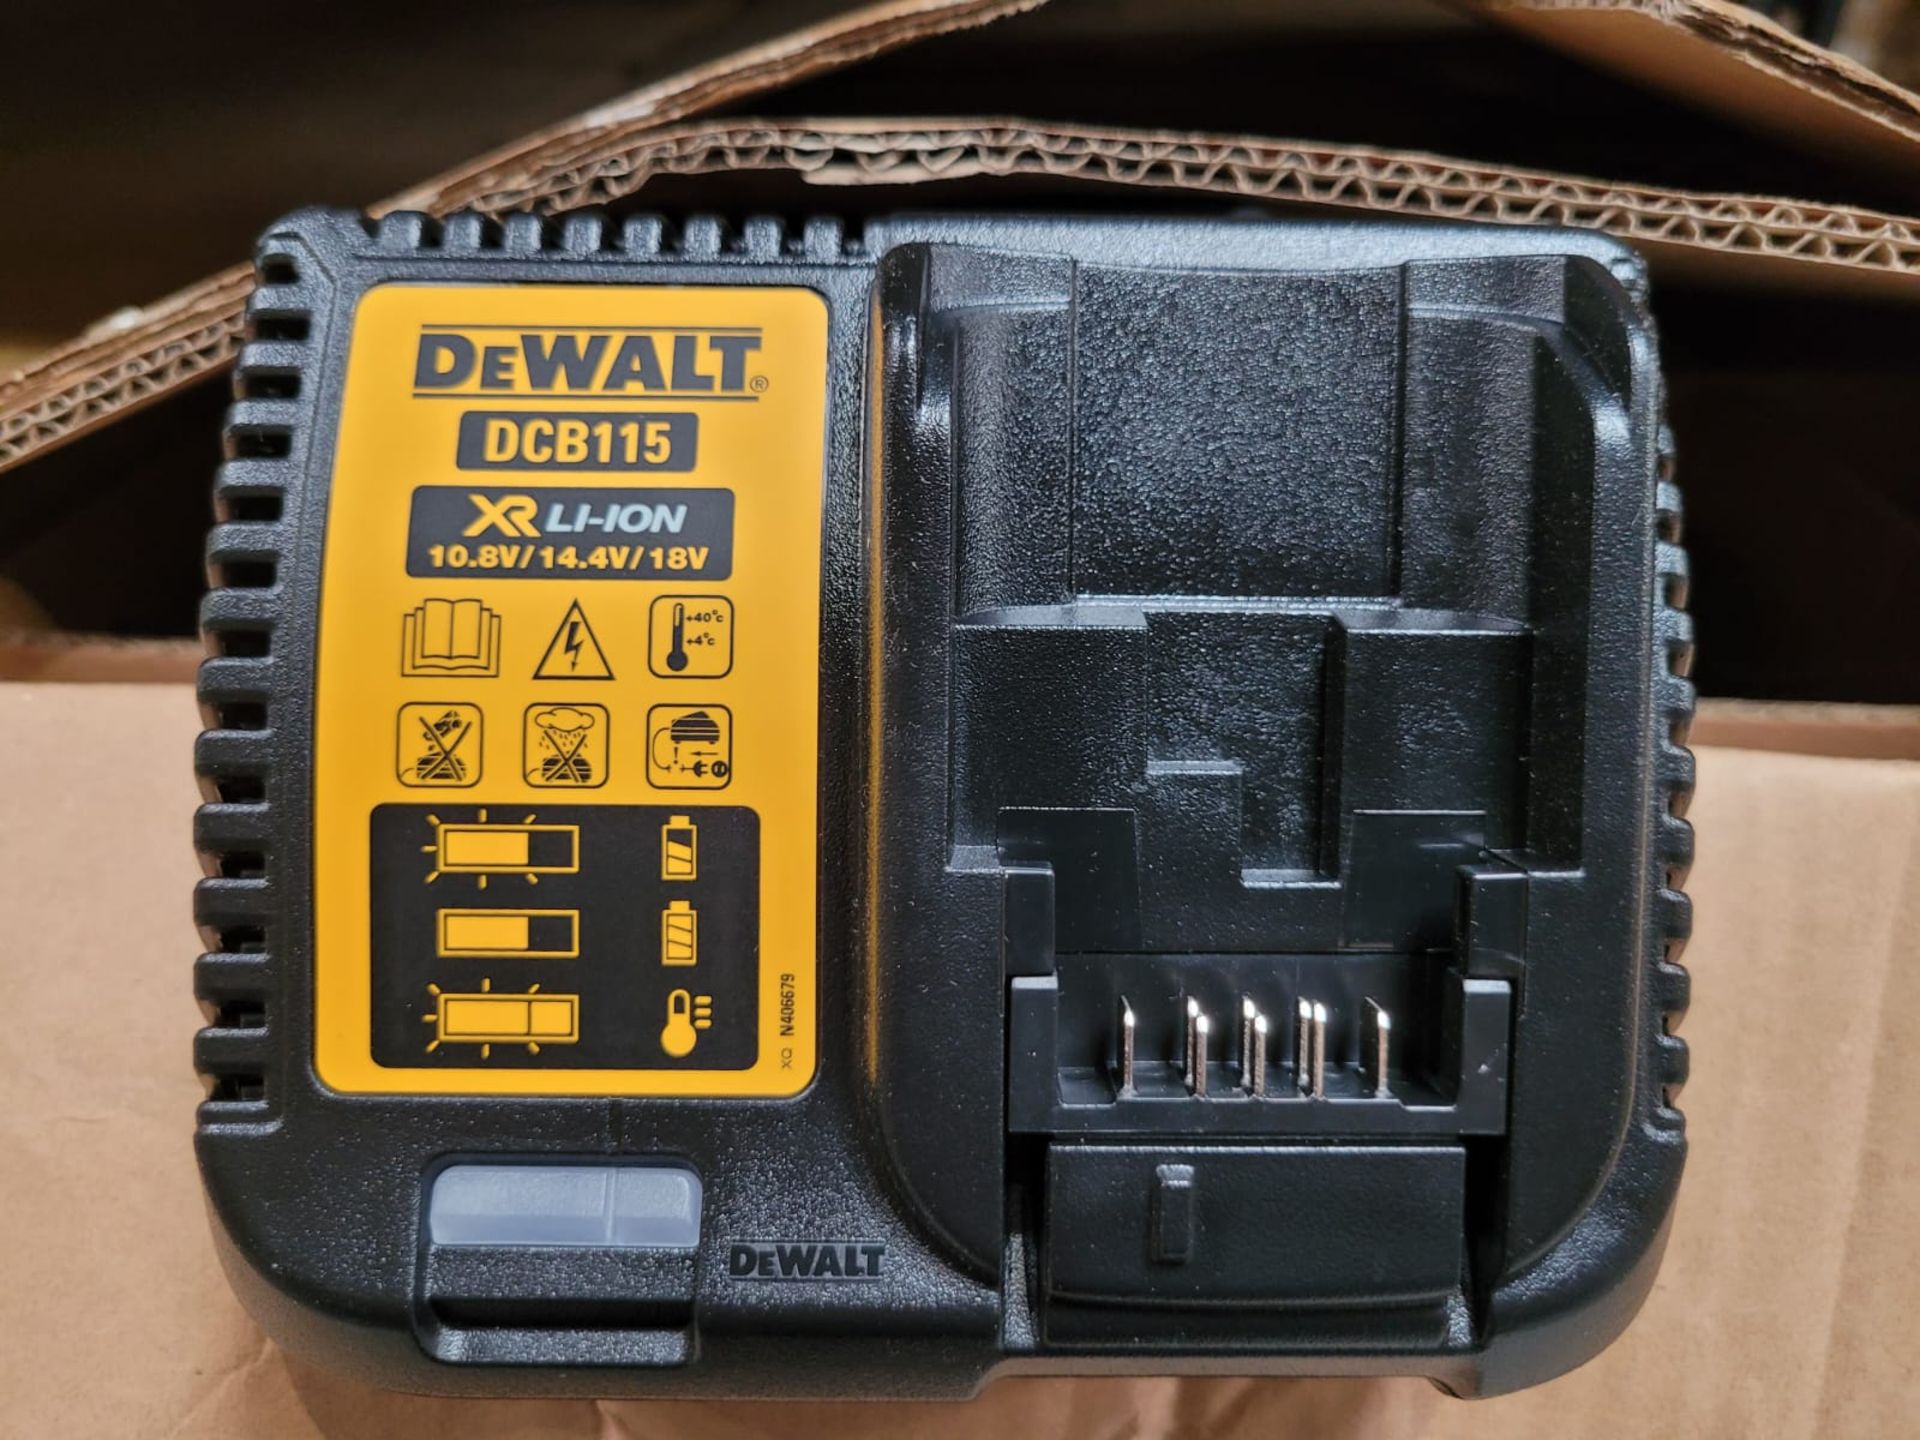 Dewalt charger is brand new - Image 4 of 4